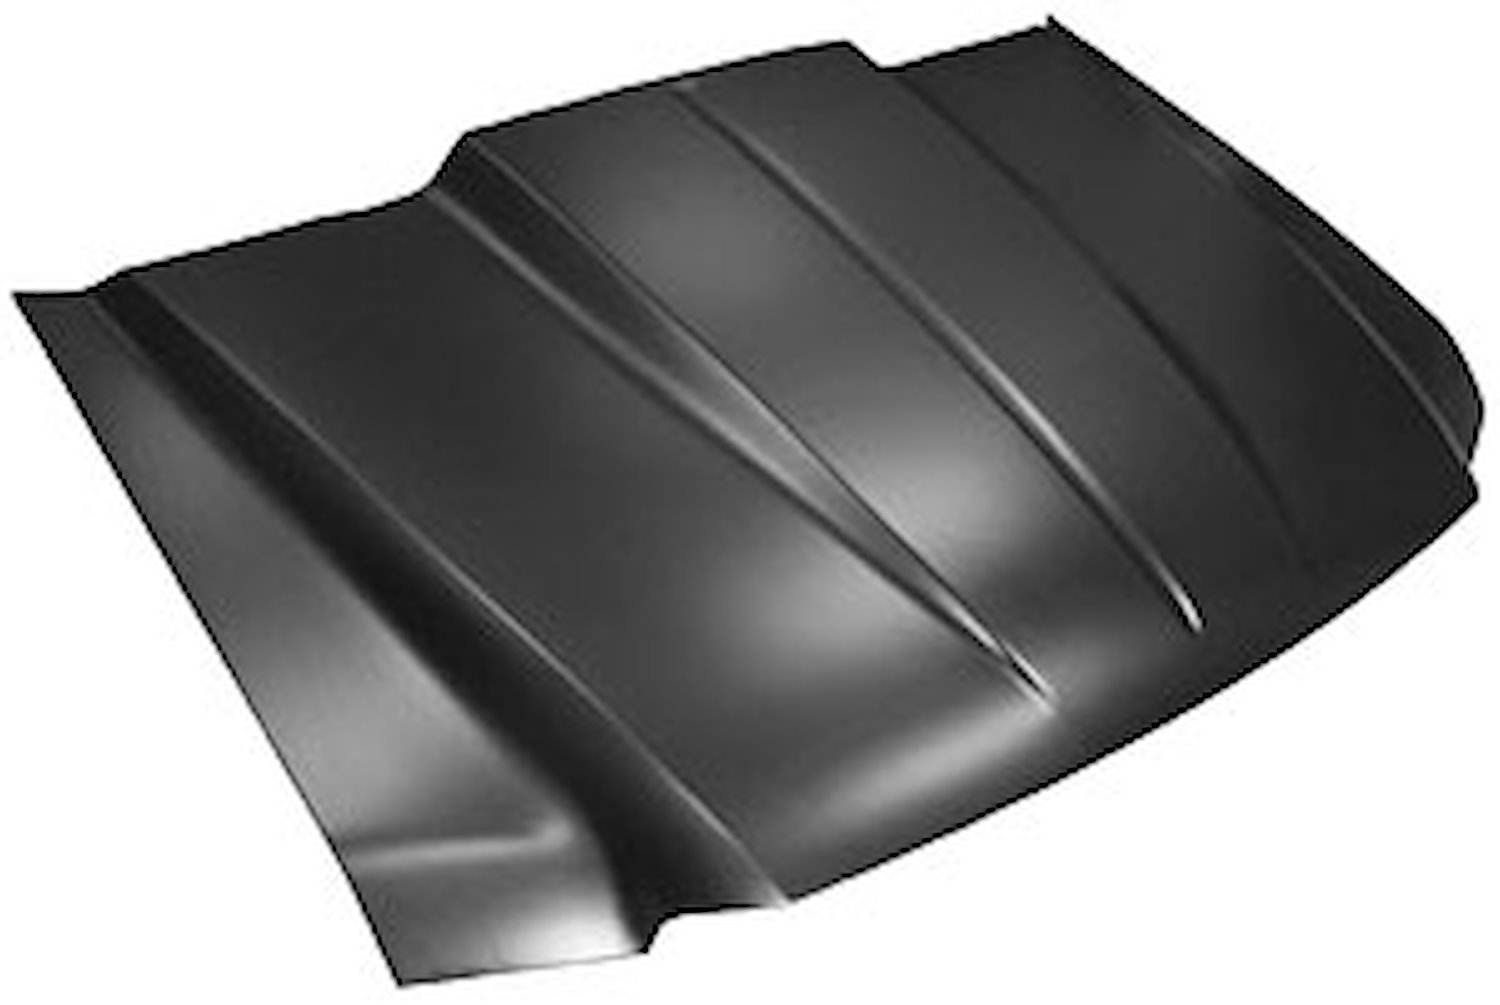 1987-035 Cowl Induction Hood for 1999-2007 Ford Super Duty Trucks, 2000-2005 Ford Excursion [2 in.]